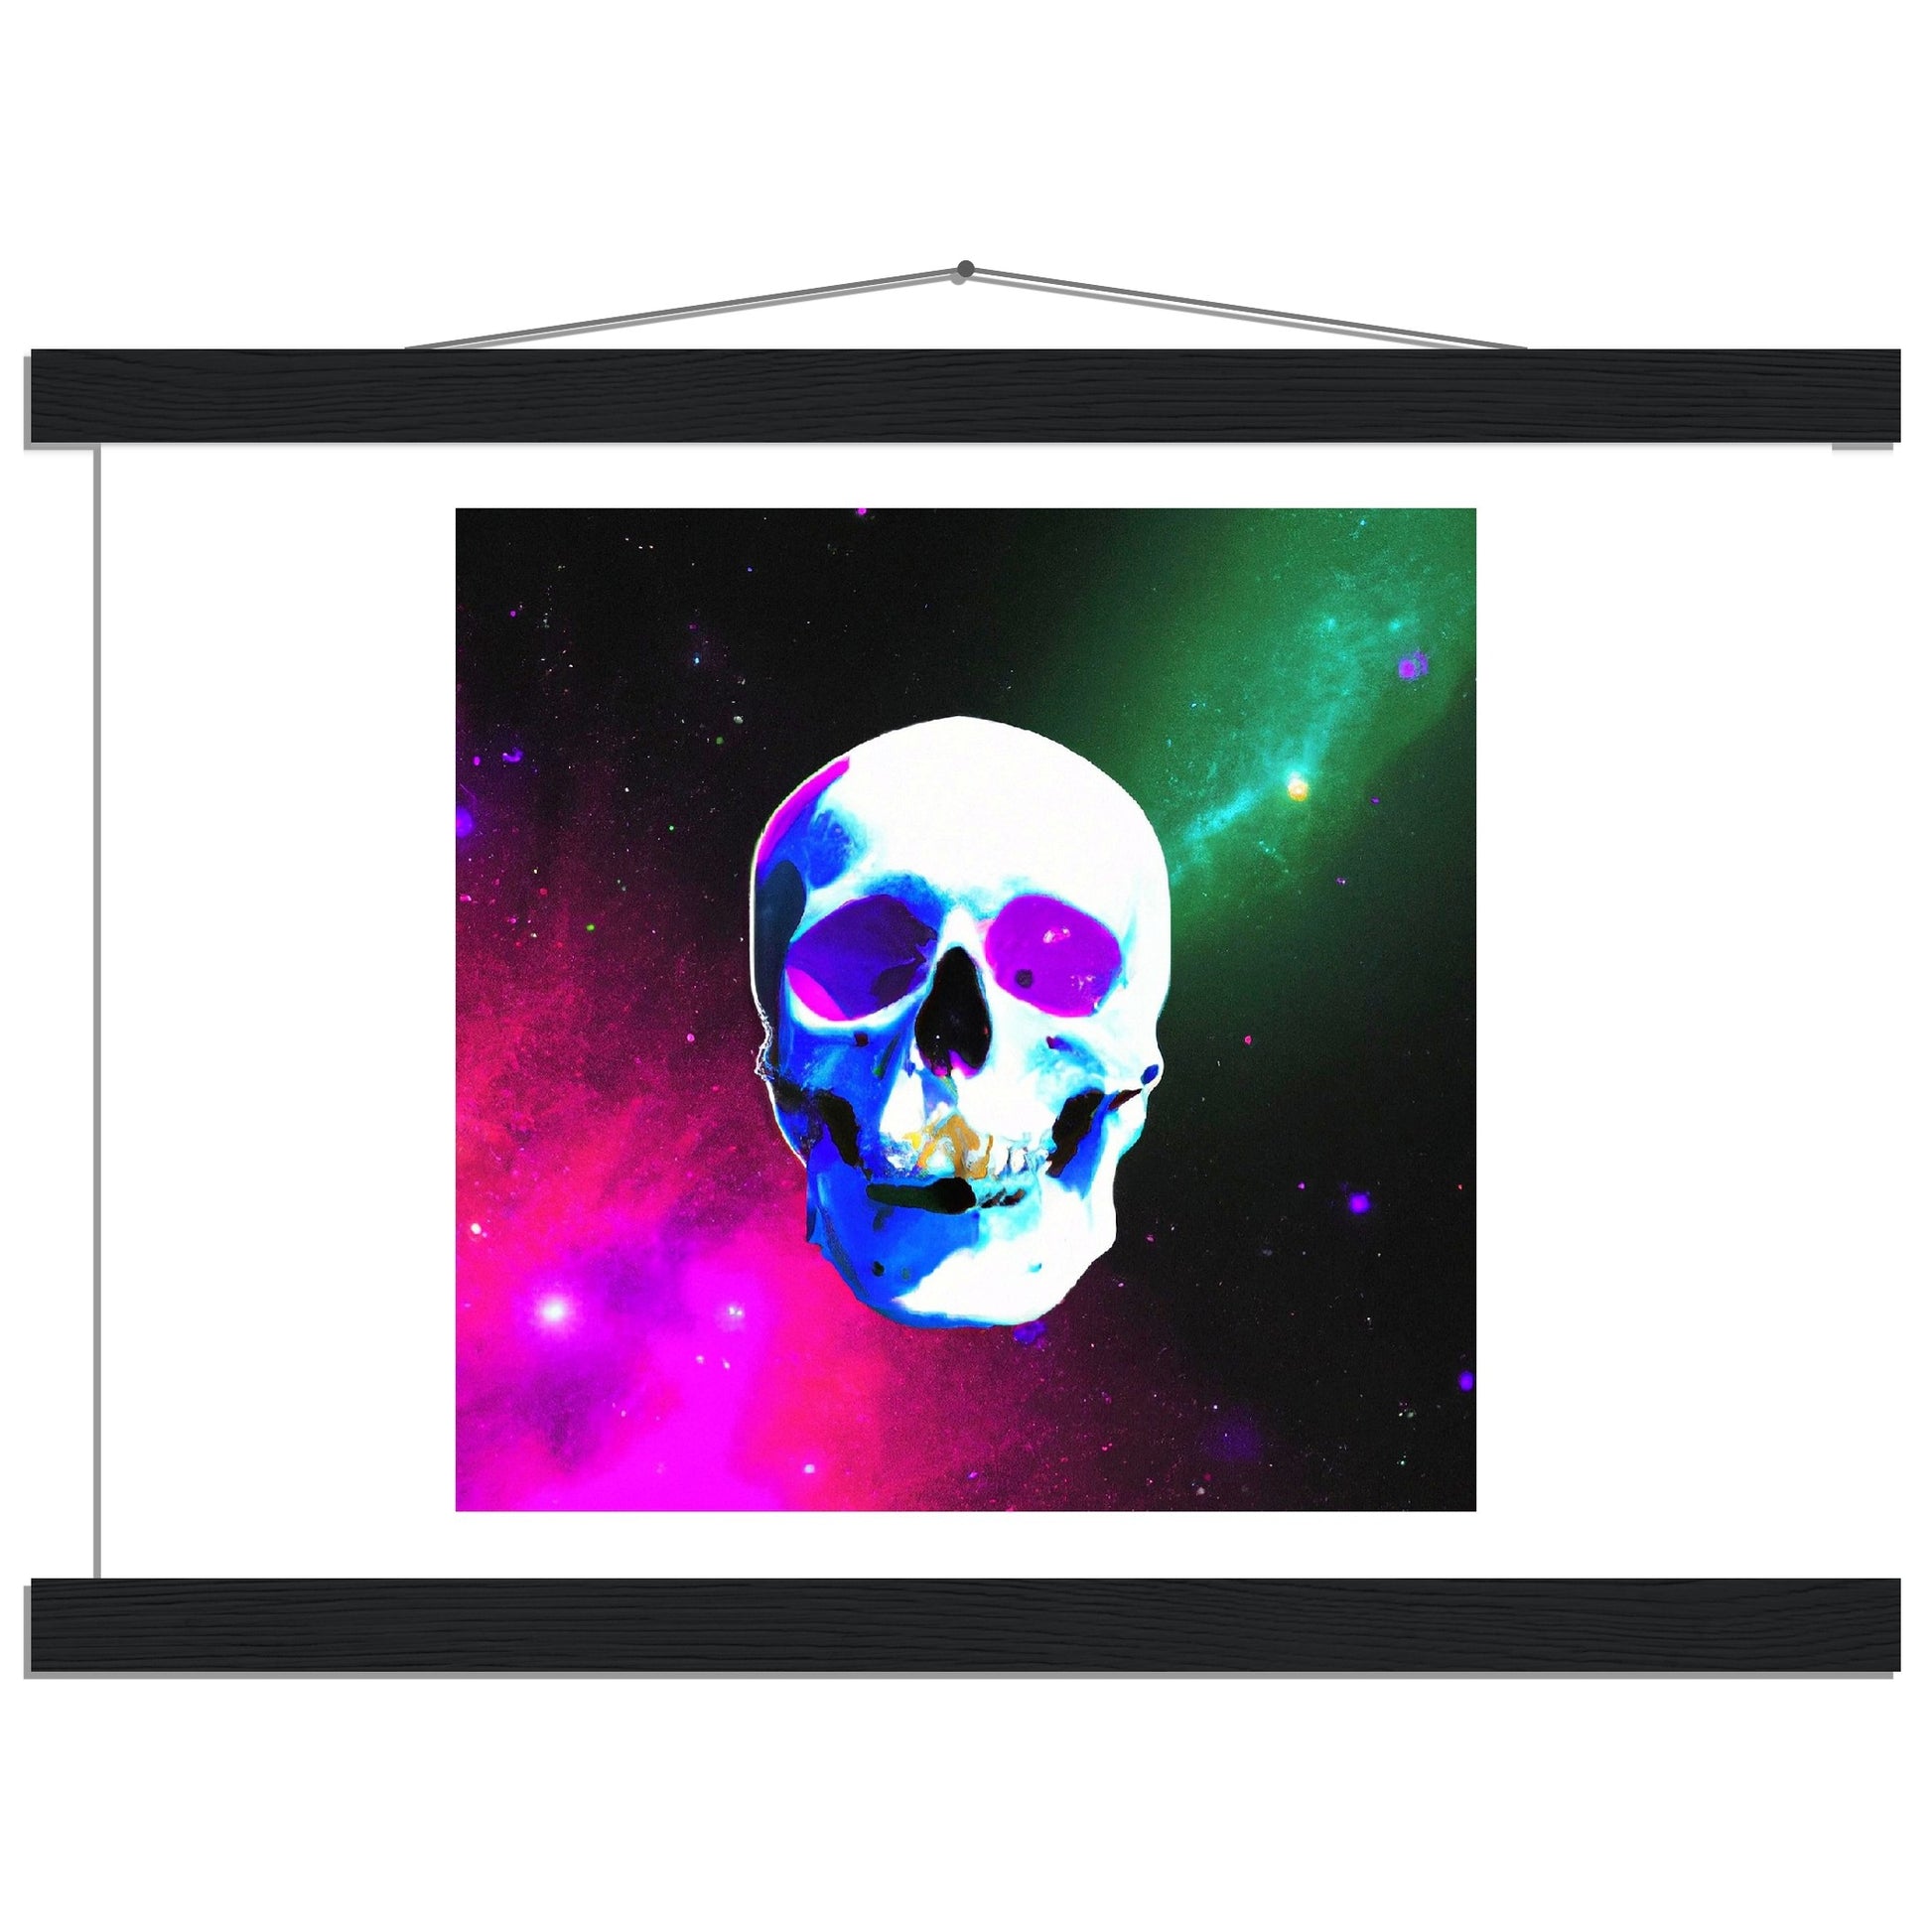 Nebula Skull Classic Matte Paper Poster with Hanger This poster with hangers has cool comic vibe of a skull within a vibrant nebula space scene.